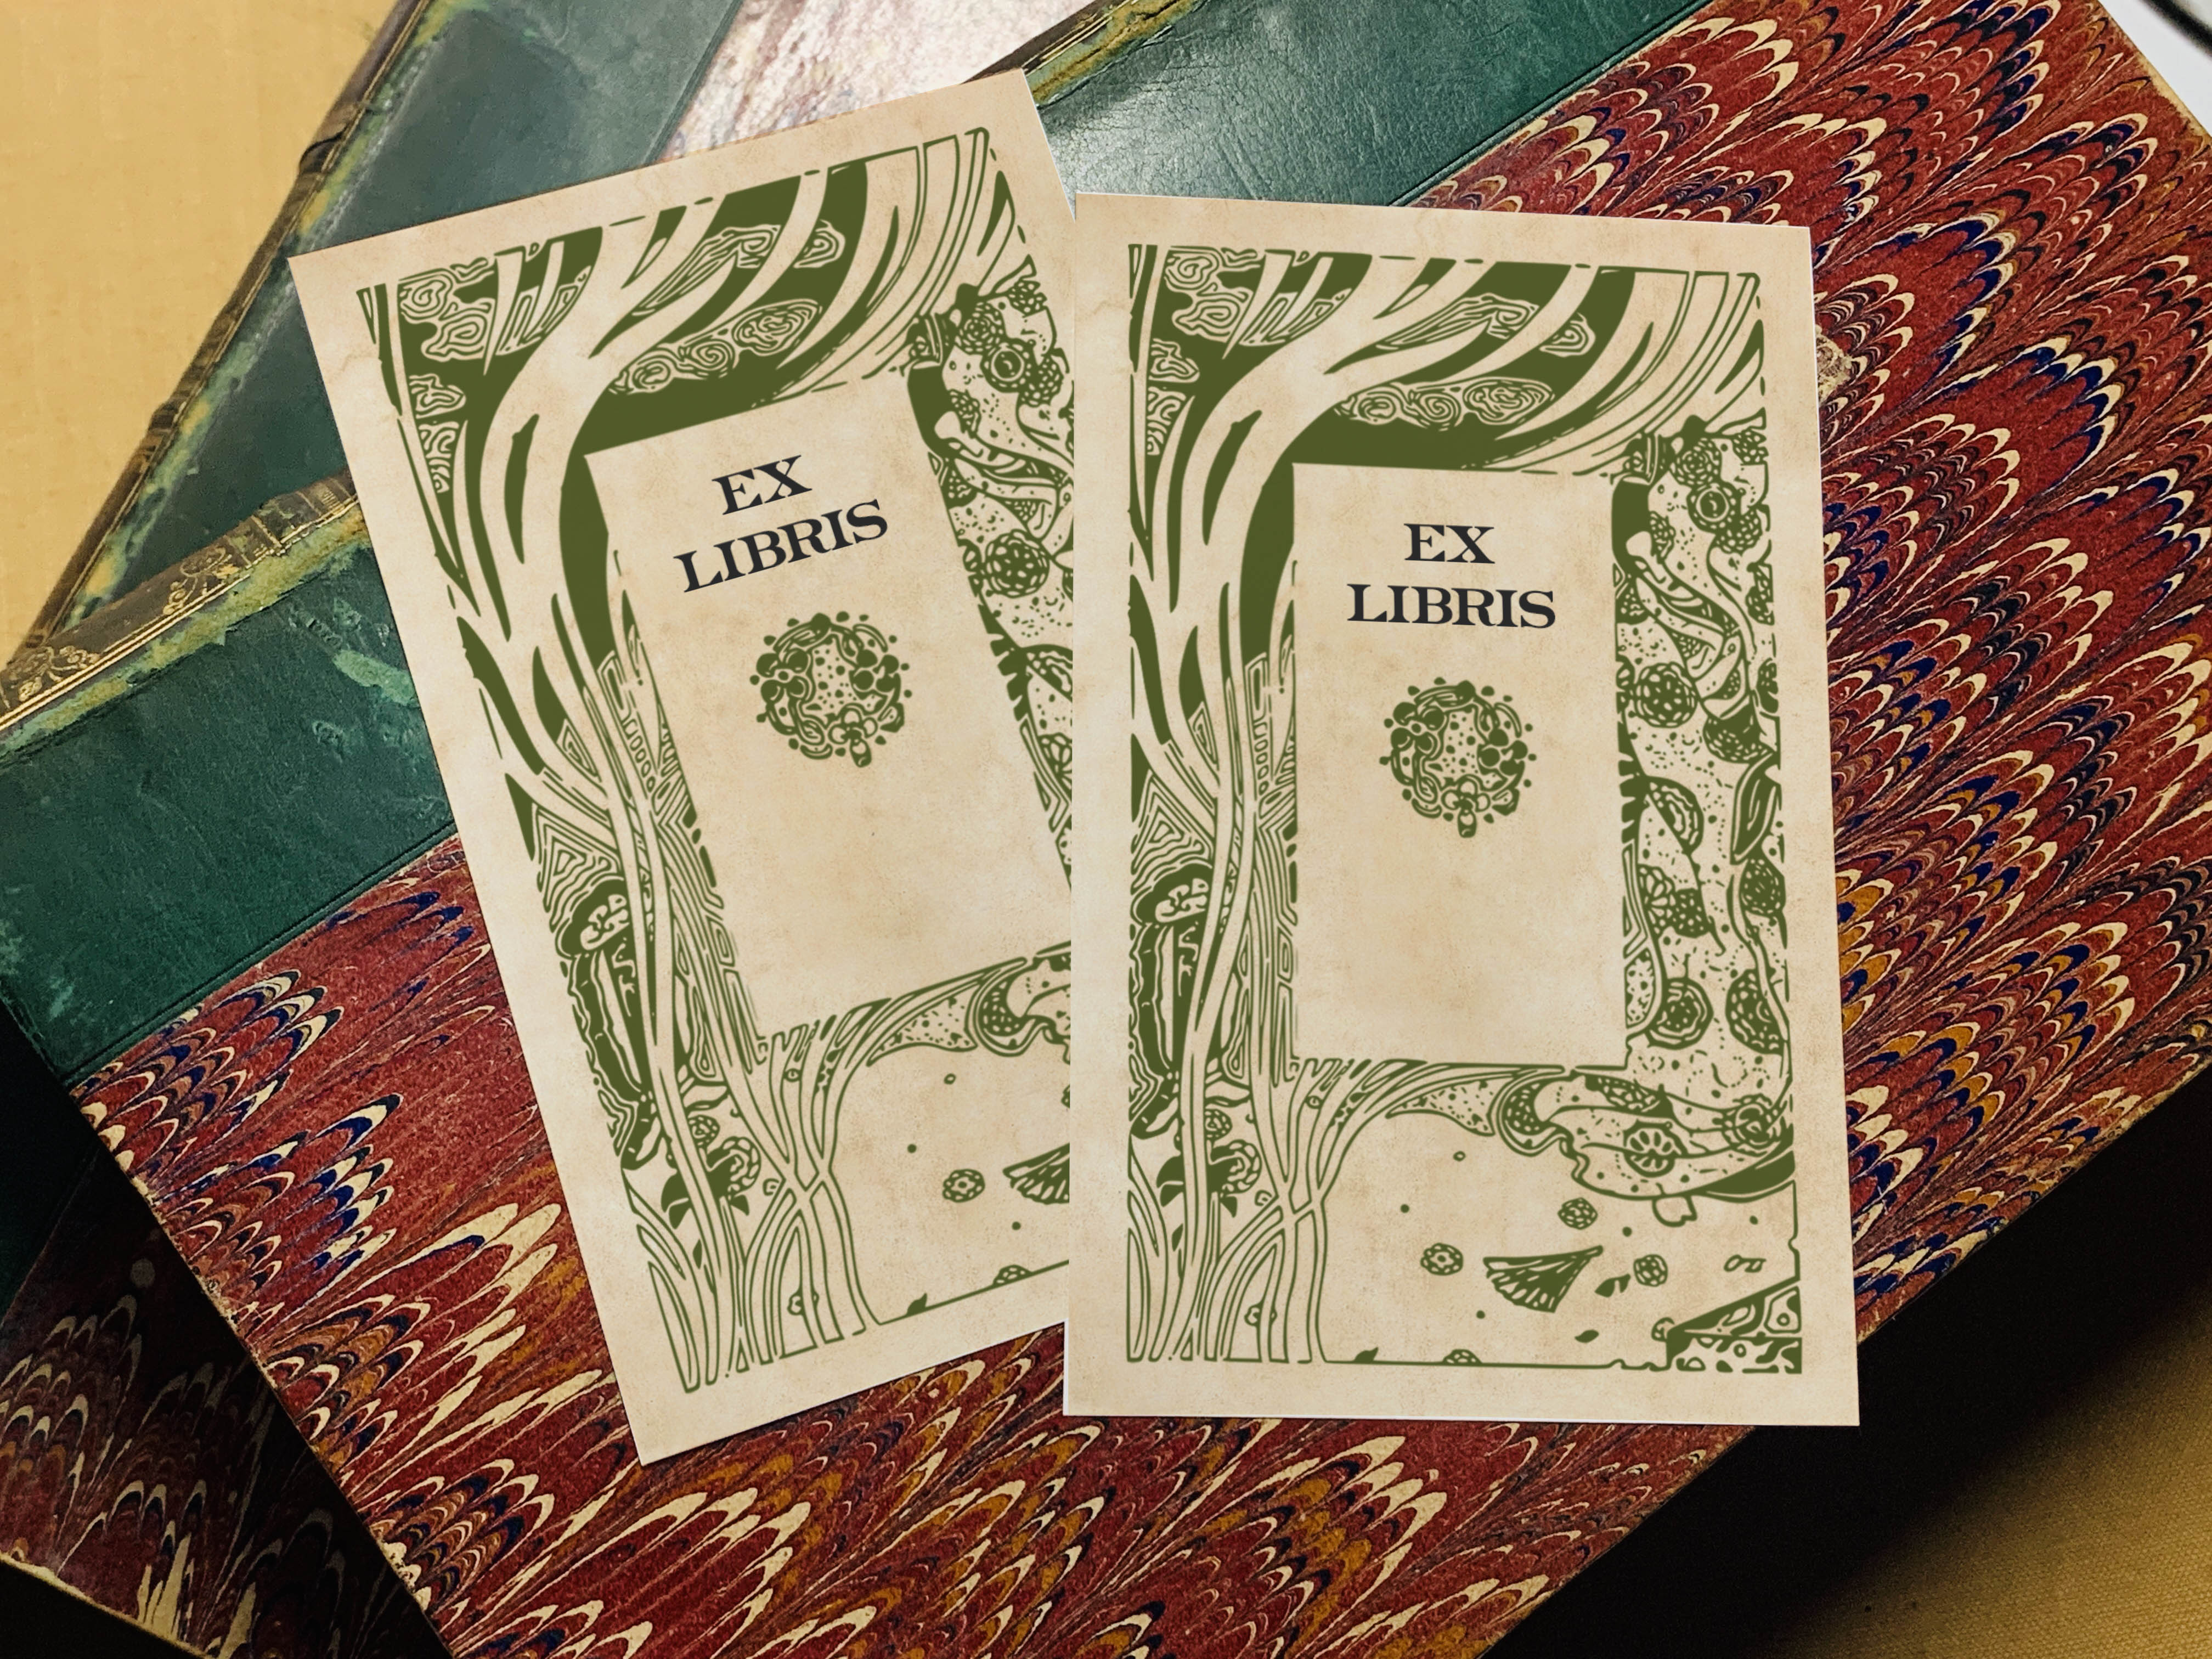 Geisha Woodcut, Personalized Ex-Libris Bookplates, Crafted on Traditional Gummed Paper, 2.5in x 4in, Set of 30